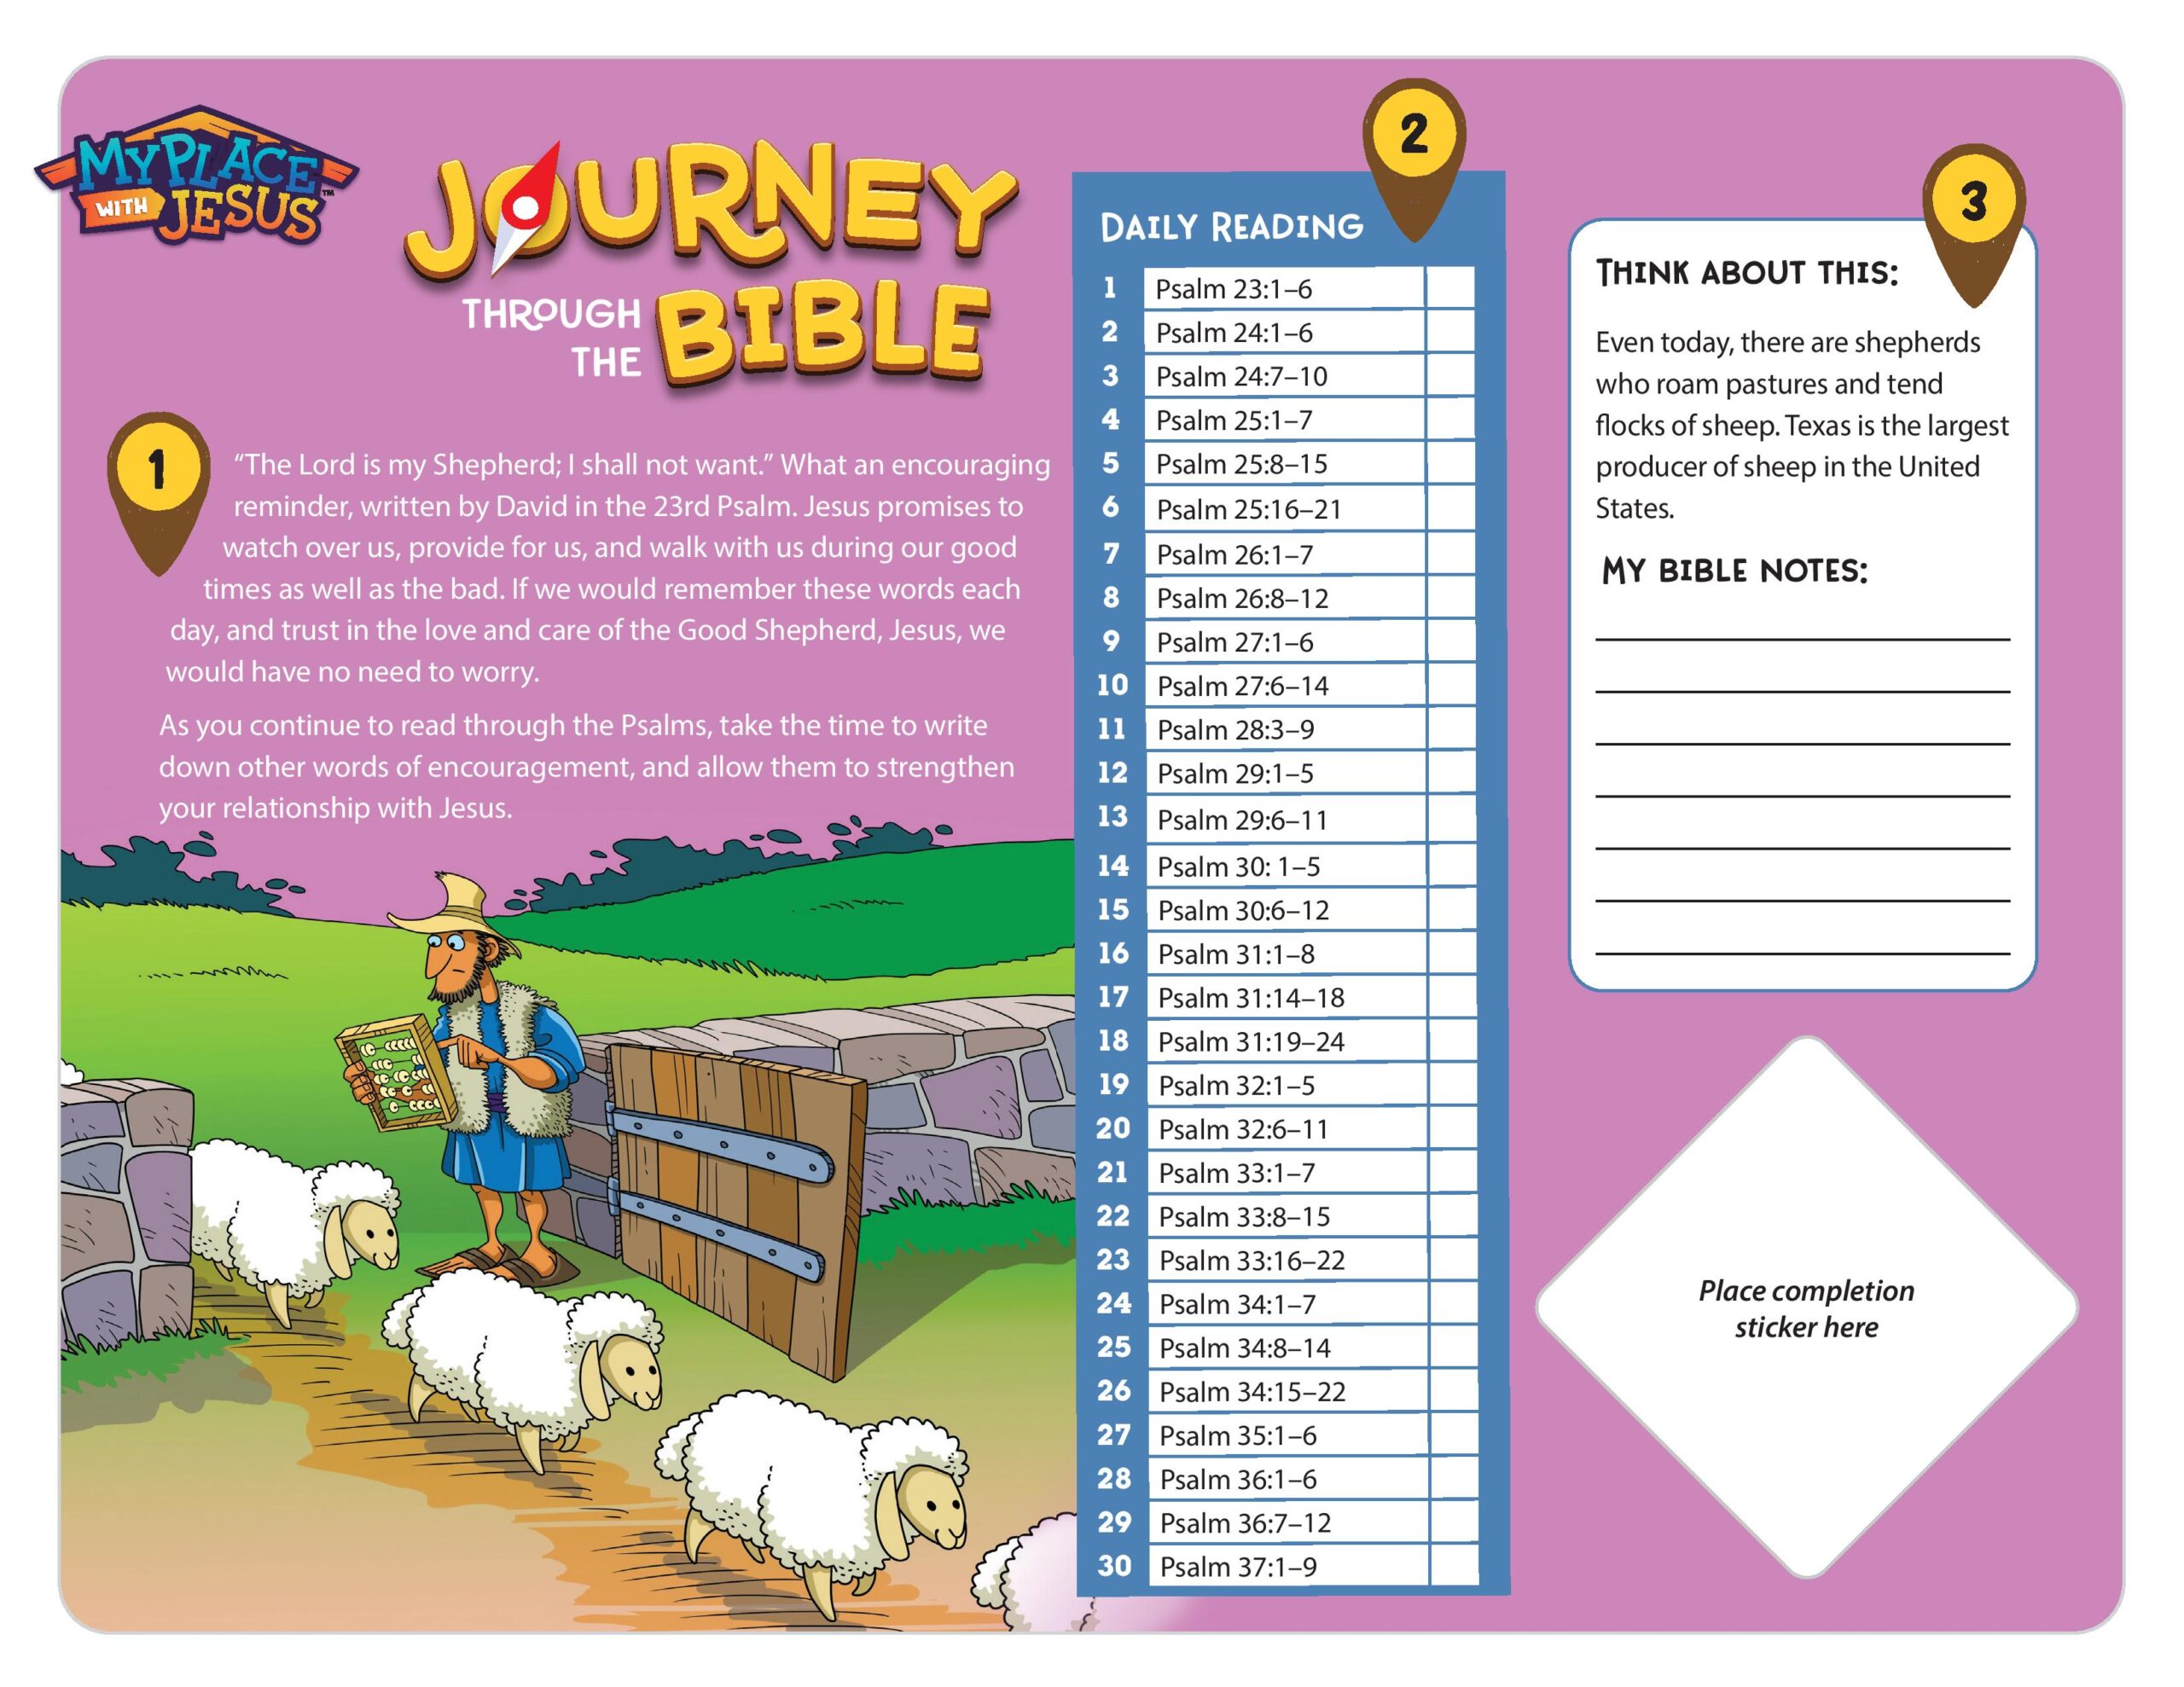 Download the October Journey Through the Bible